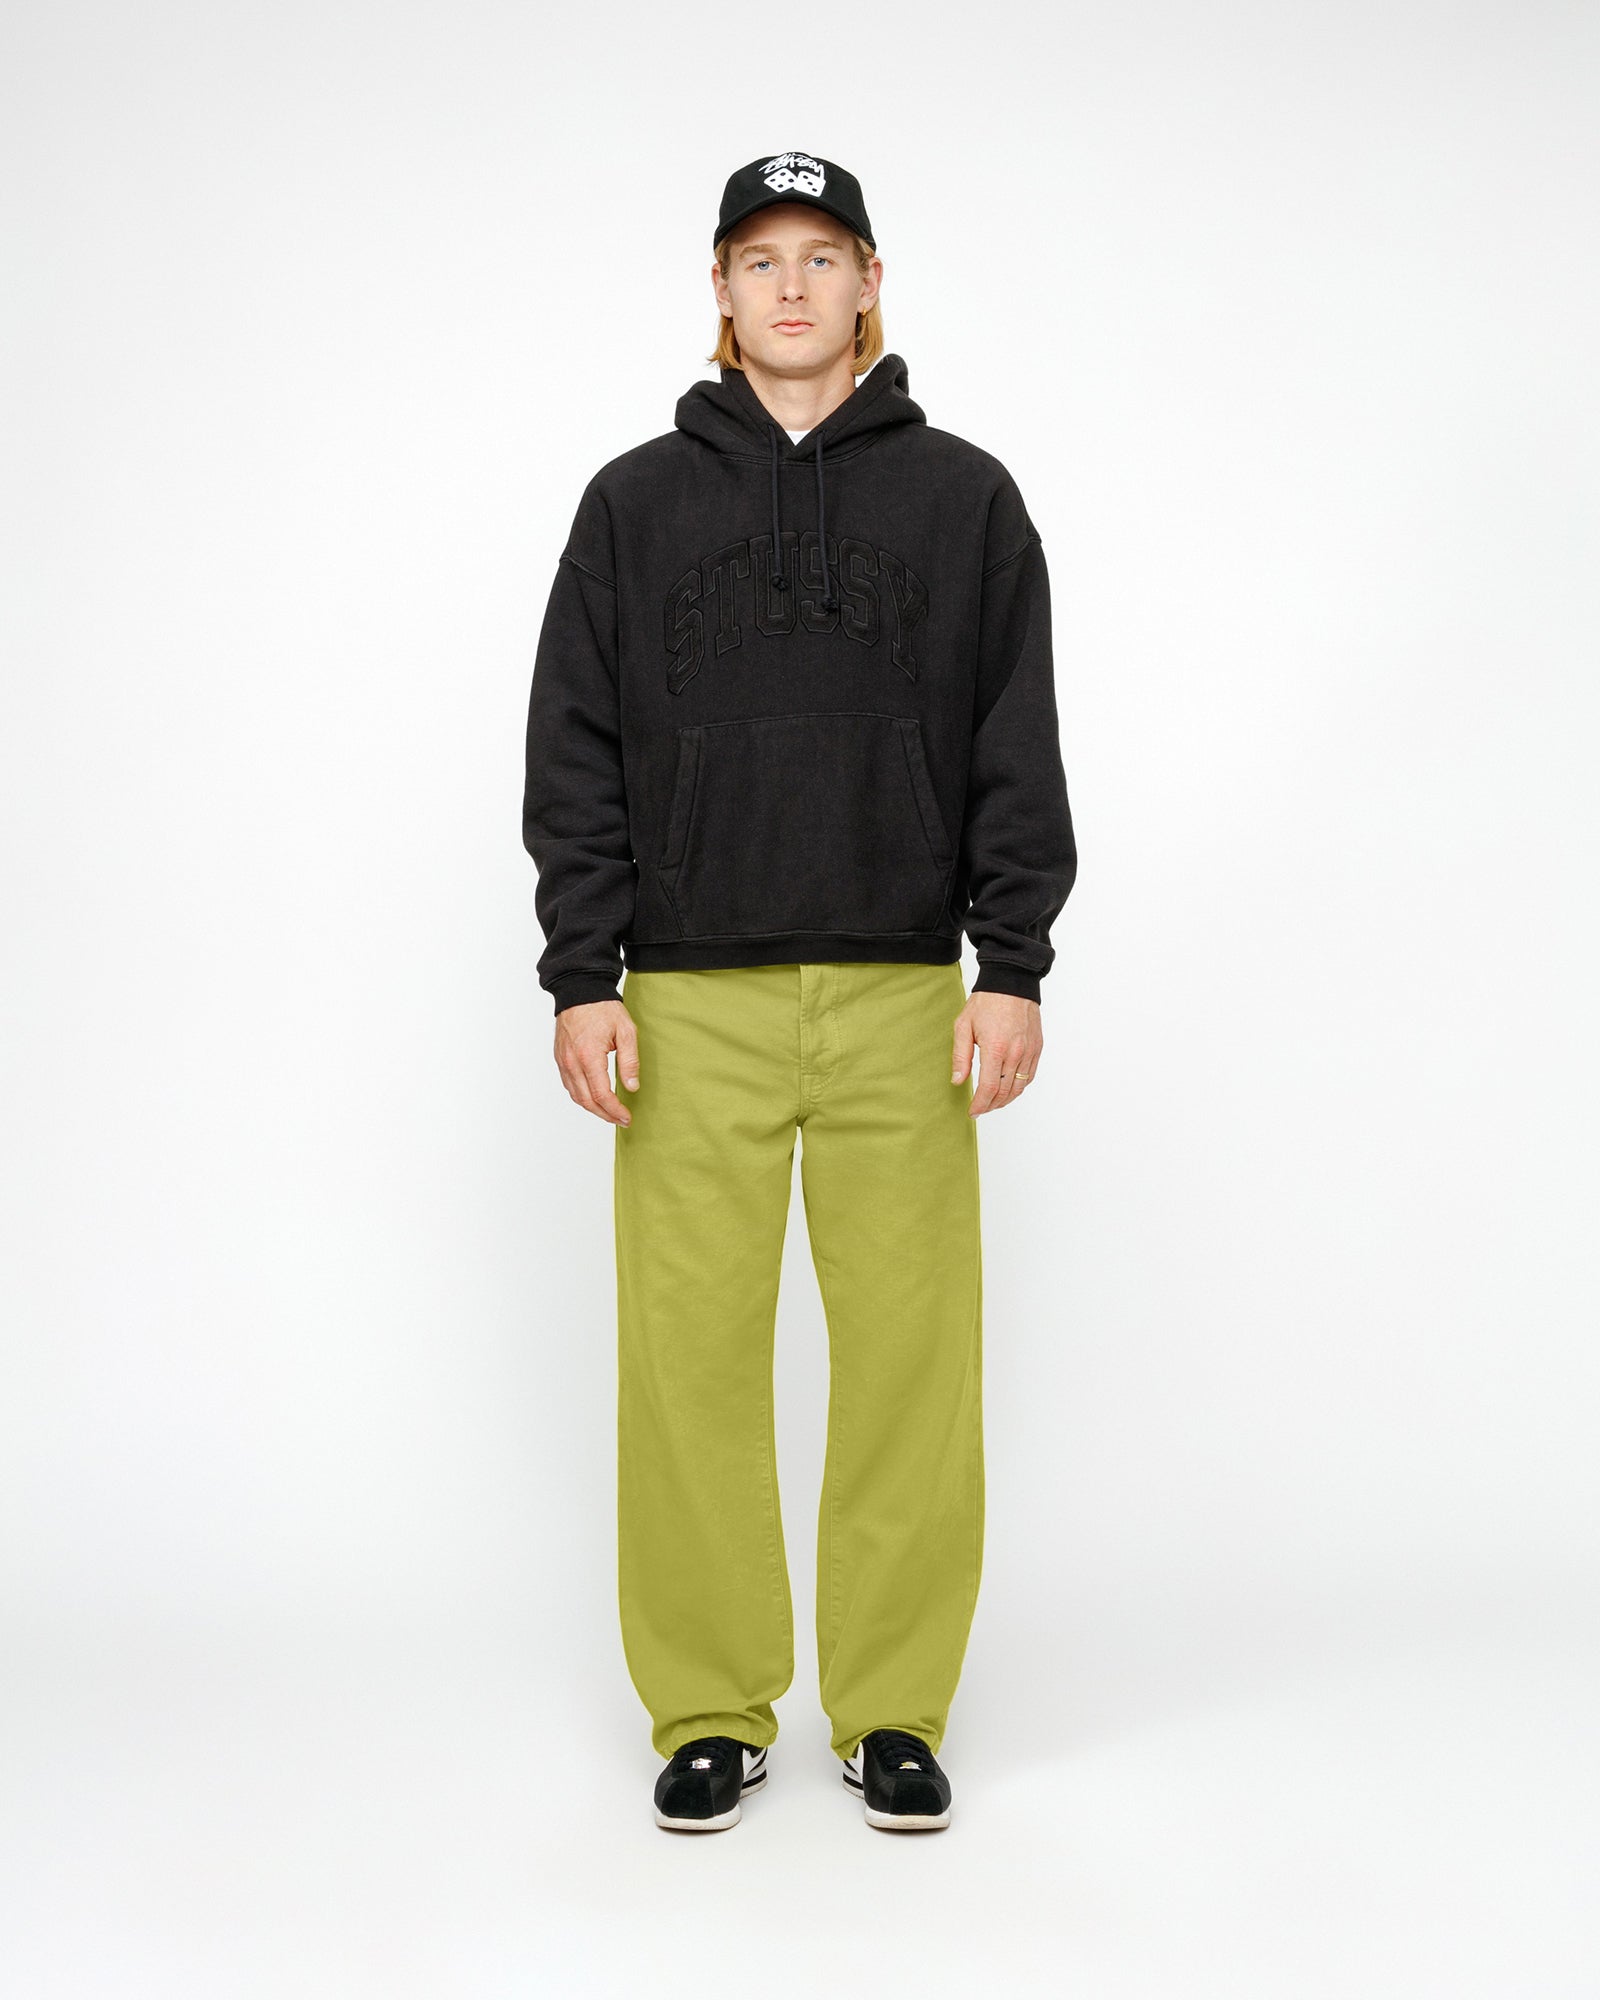 Stüssy Classic Jean Washed Canvas Cactus Pants